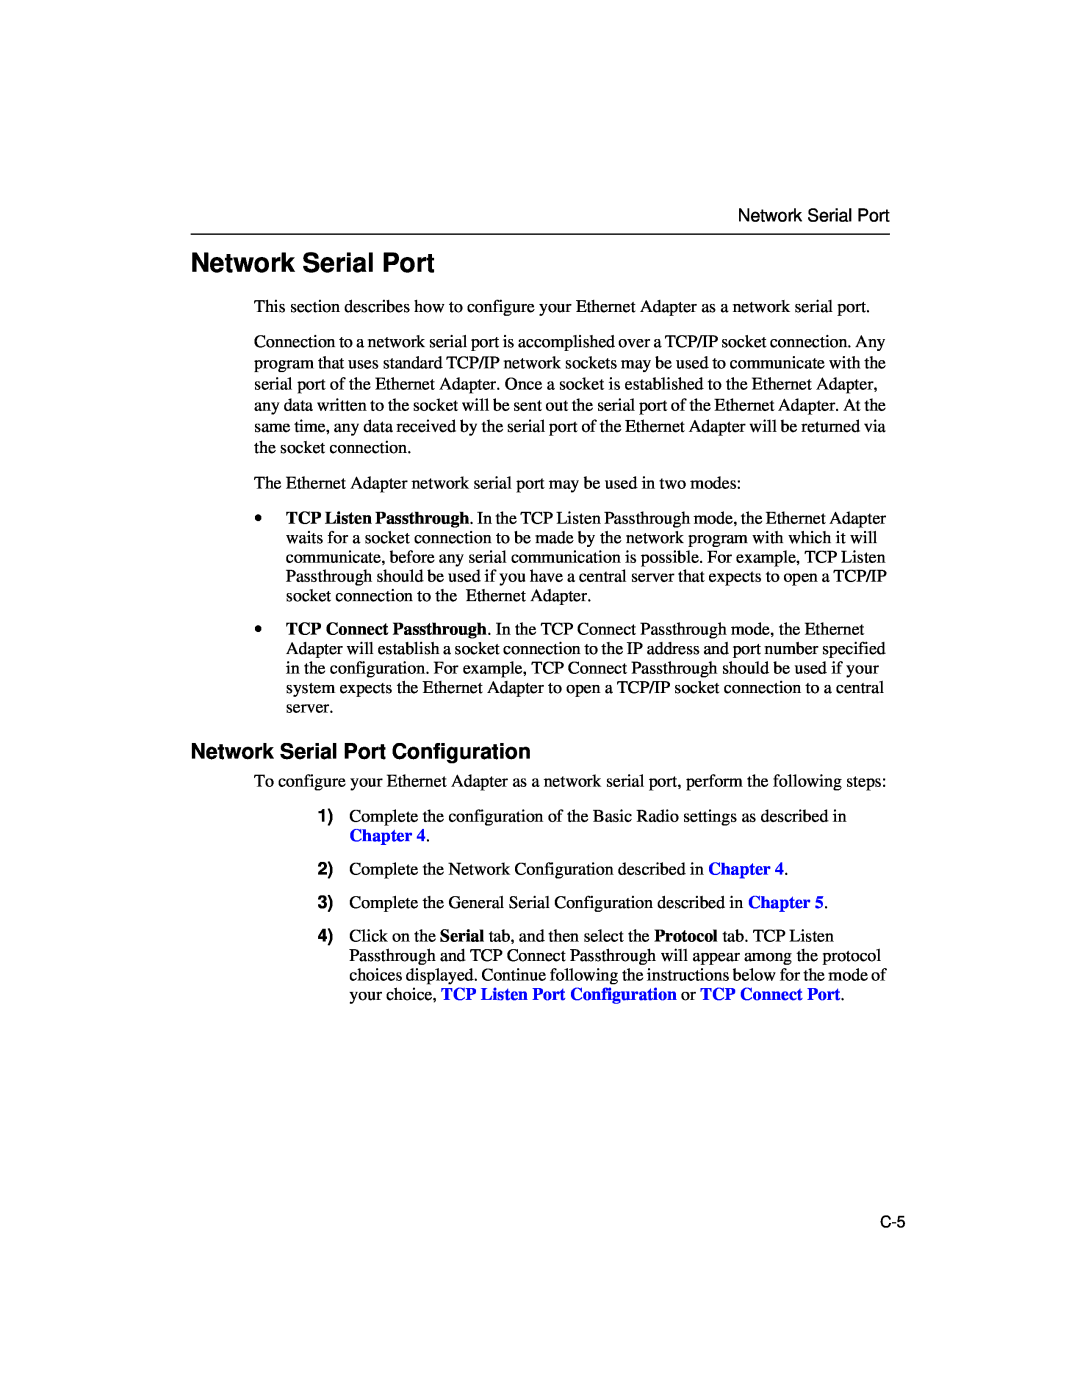 Enterasys Networks Wireless Ethernet Adapter I manual Network Serial Port Configuration 